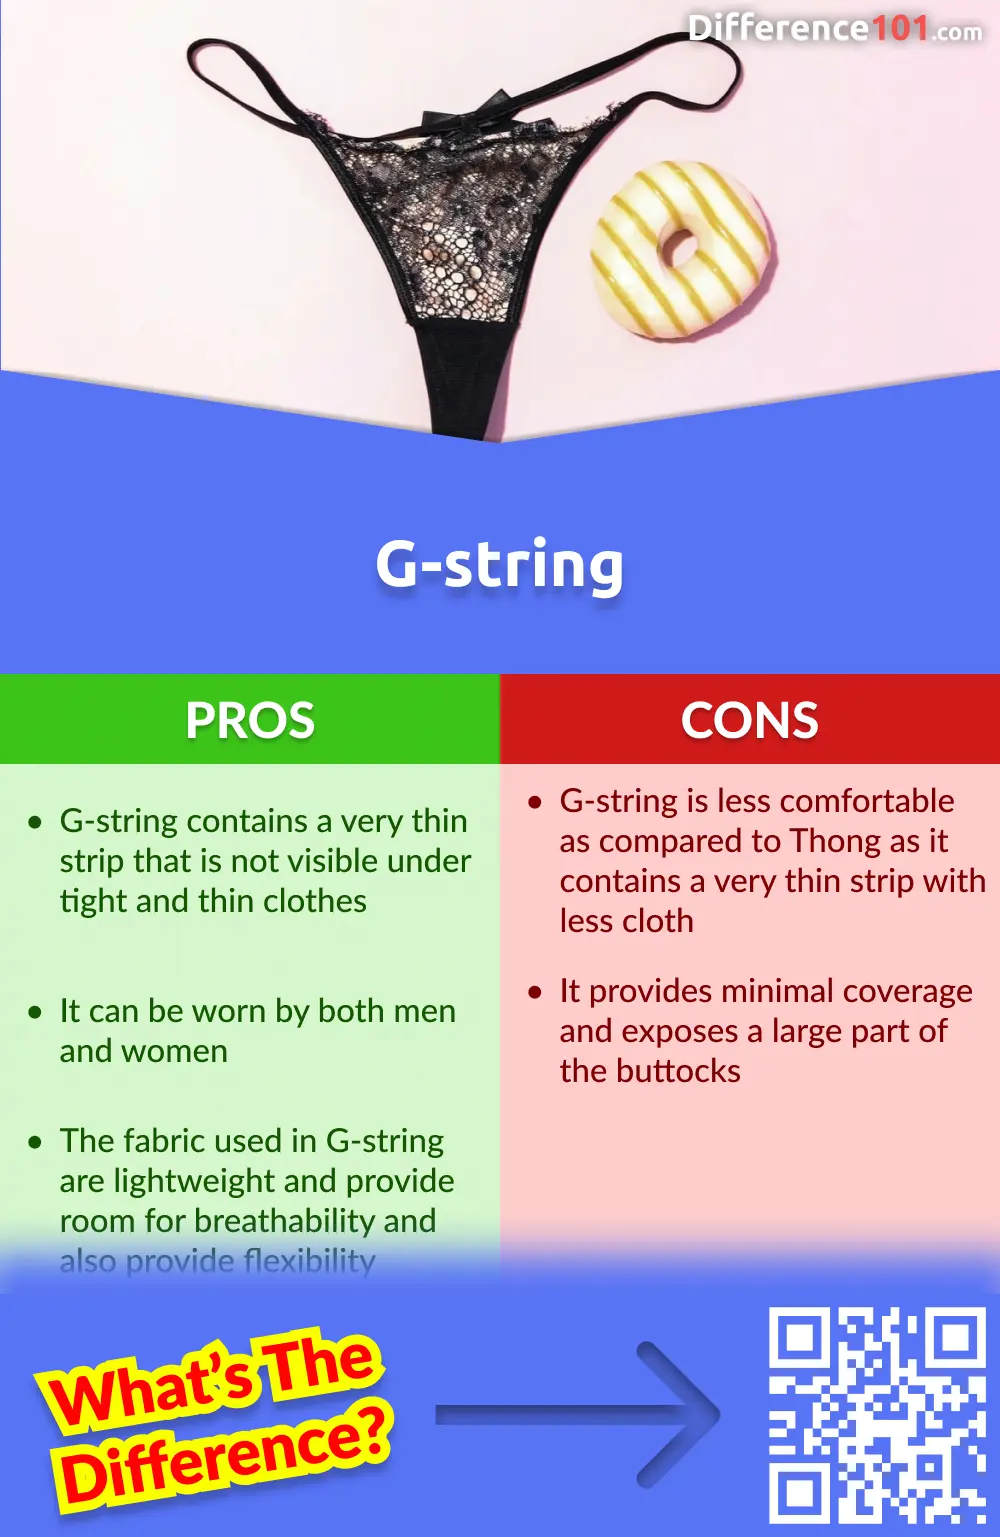 medeleerling Toerist Diplomatie G-string vs. Thong: 5 Key Differences, Similarities, Pros & Cons |  Difference 101